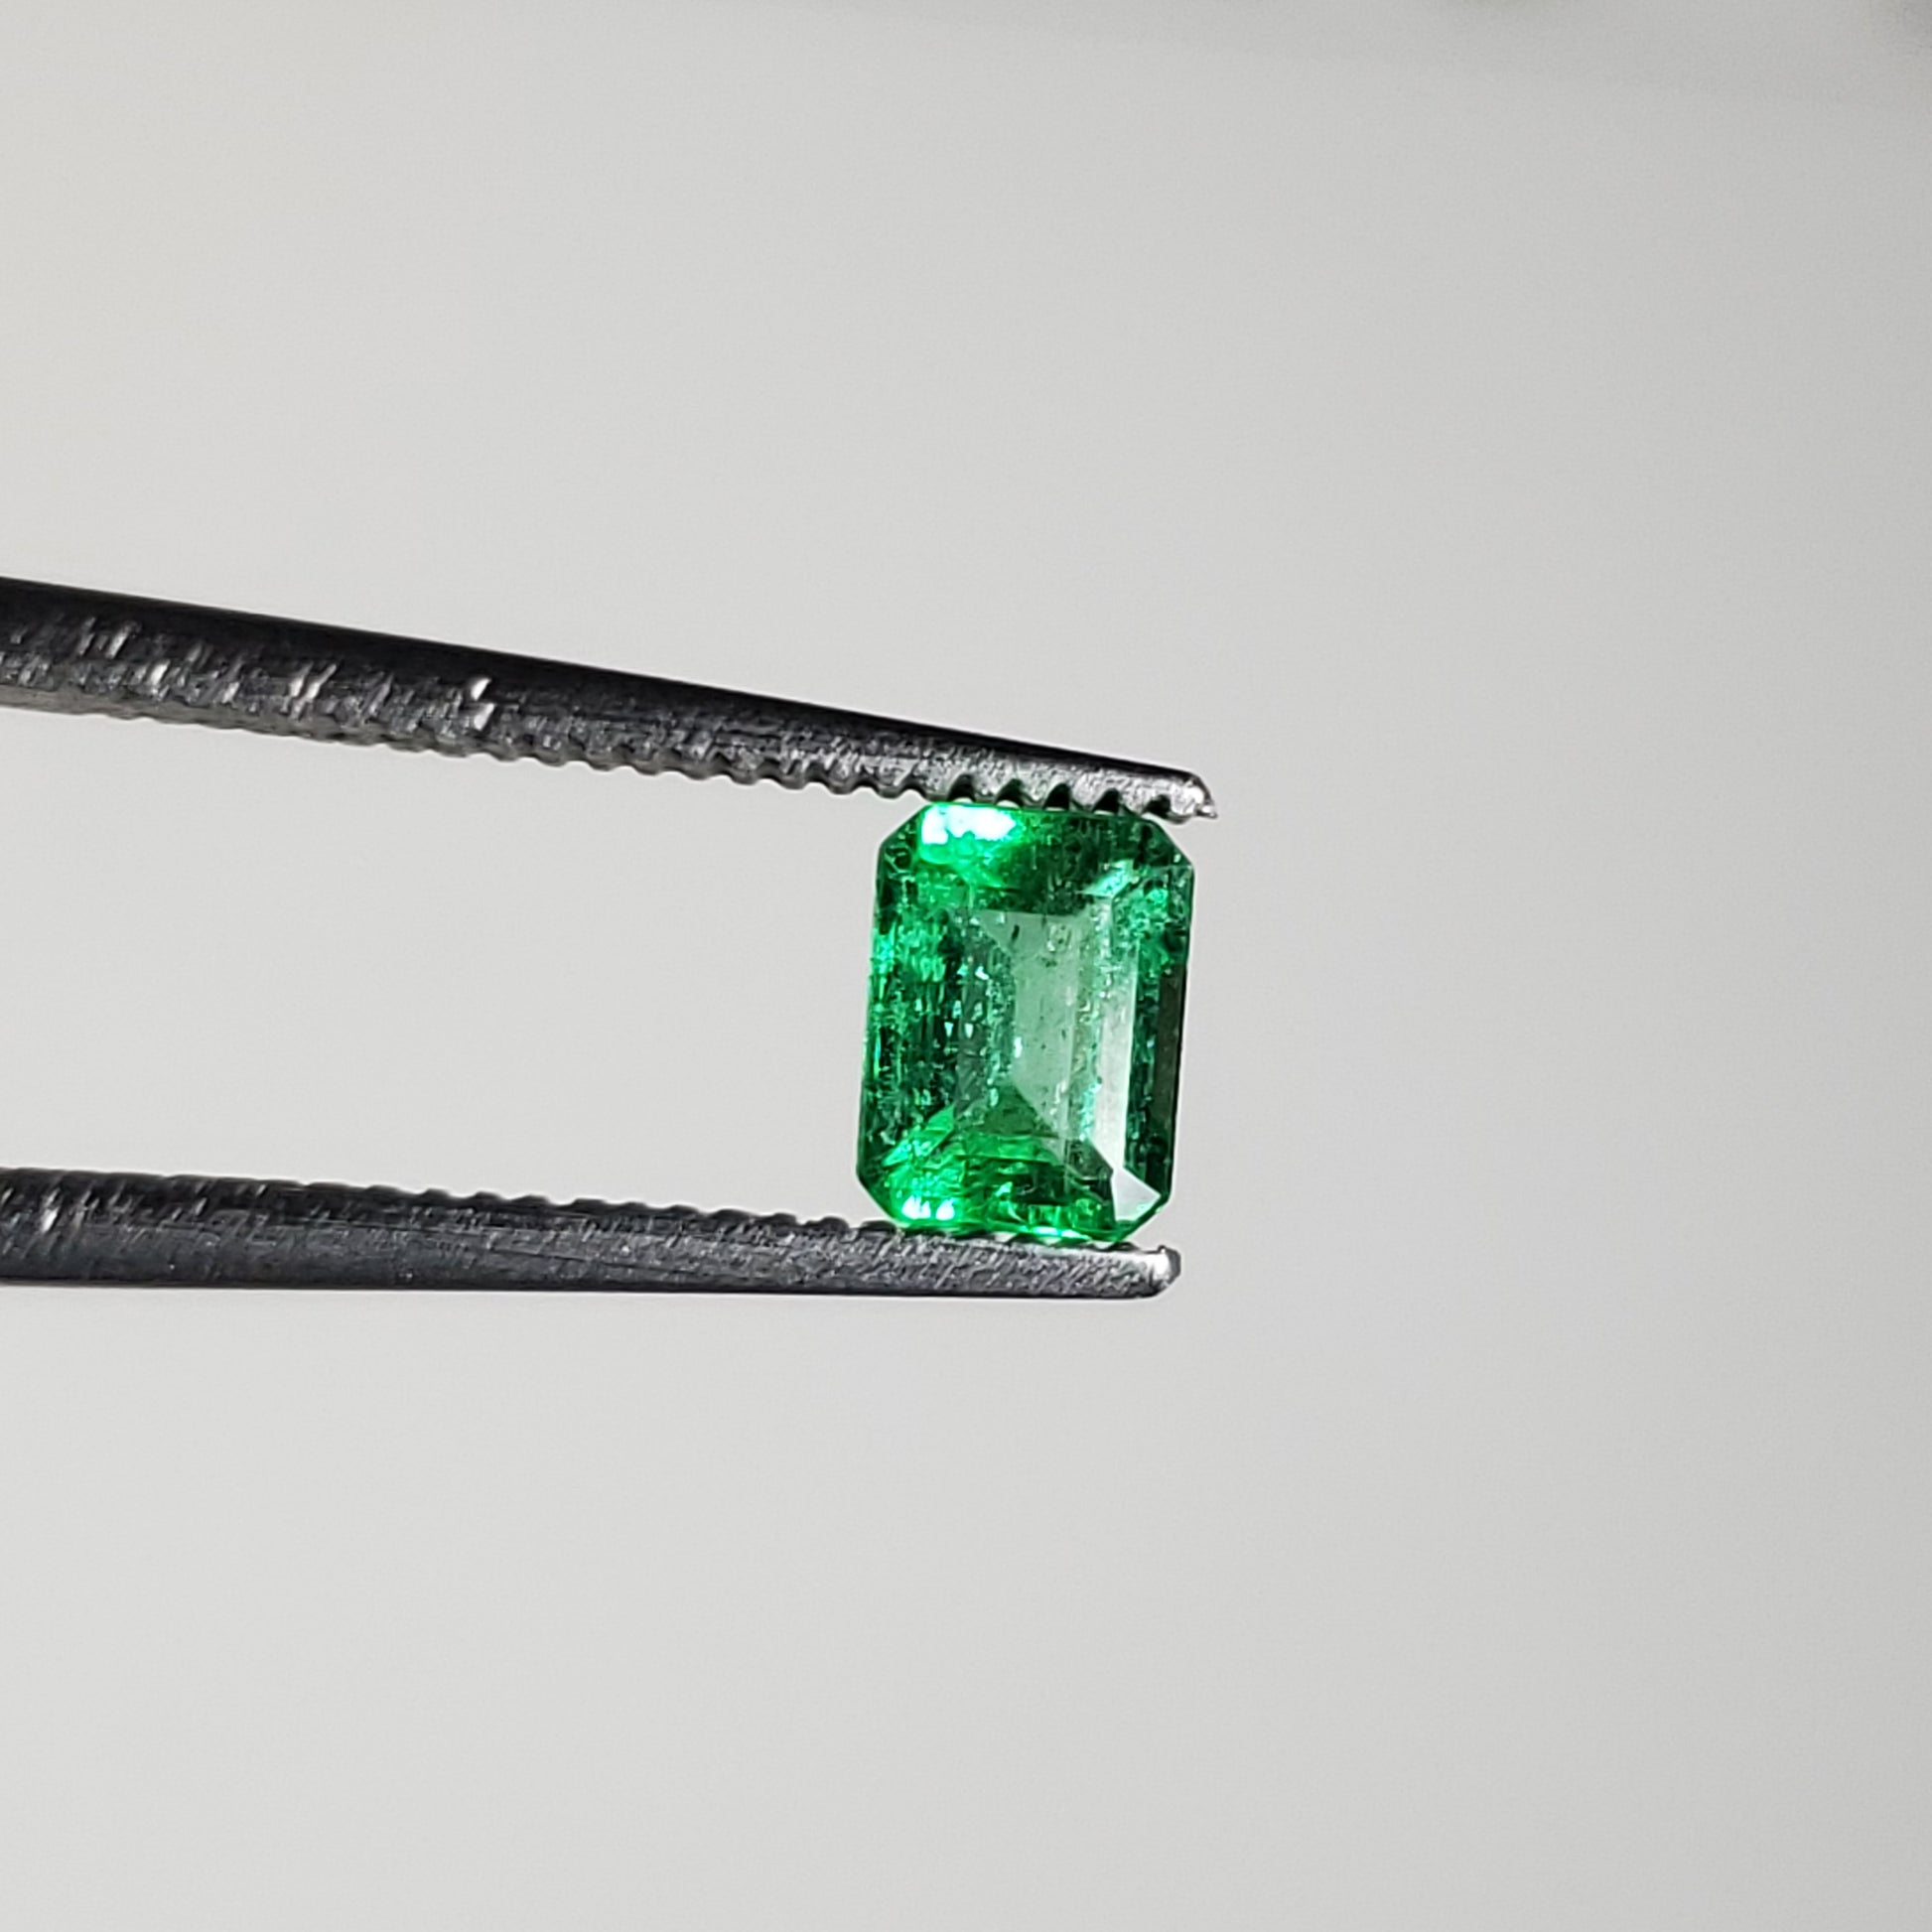 0.39 Ct Colombian Emerald | Northern Gem Supply